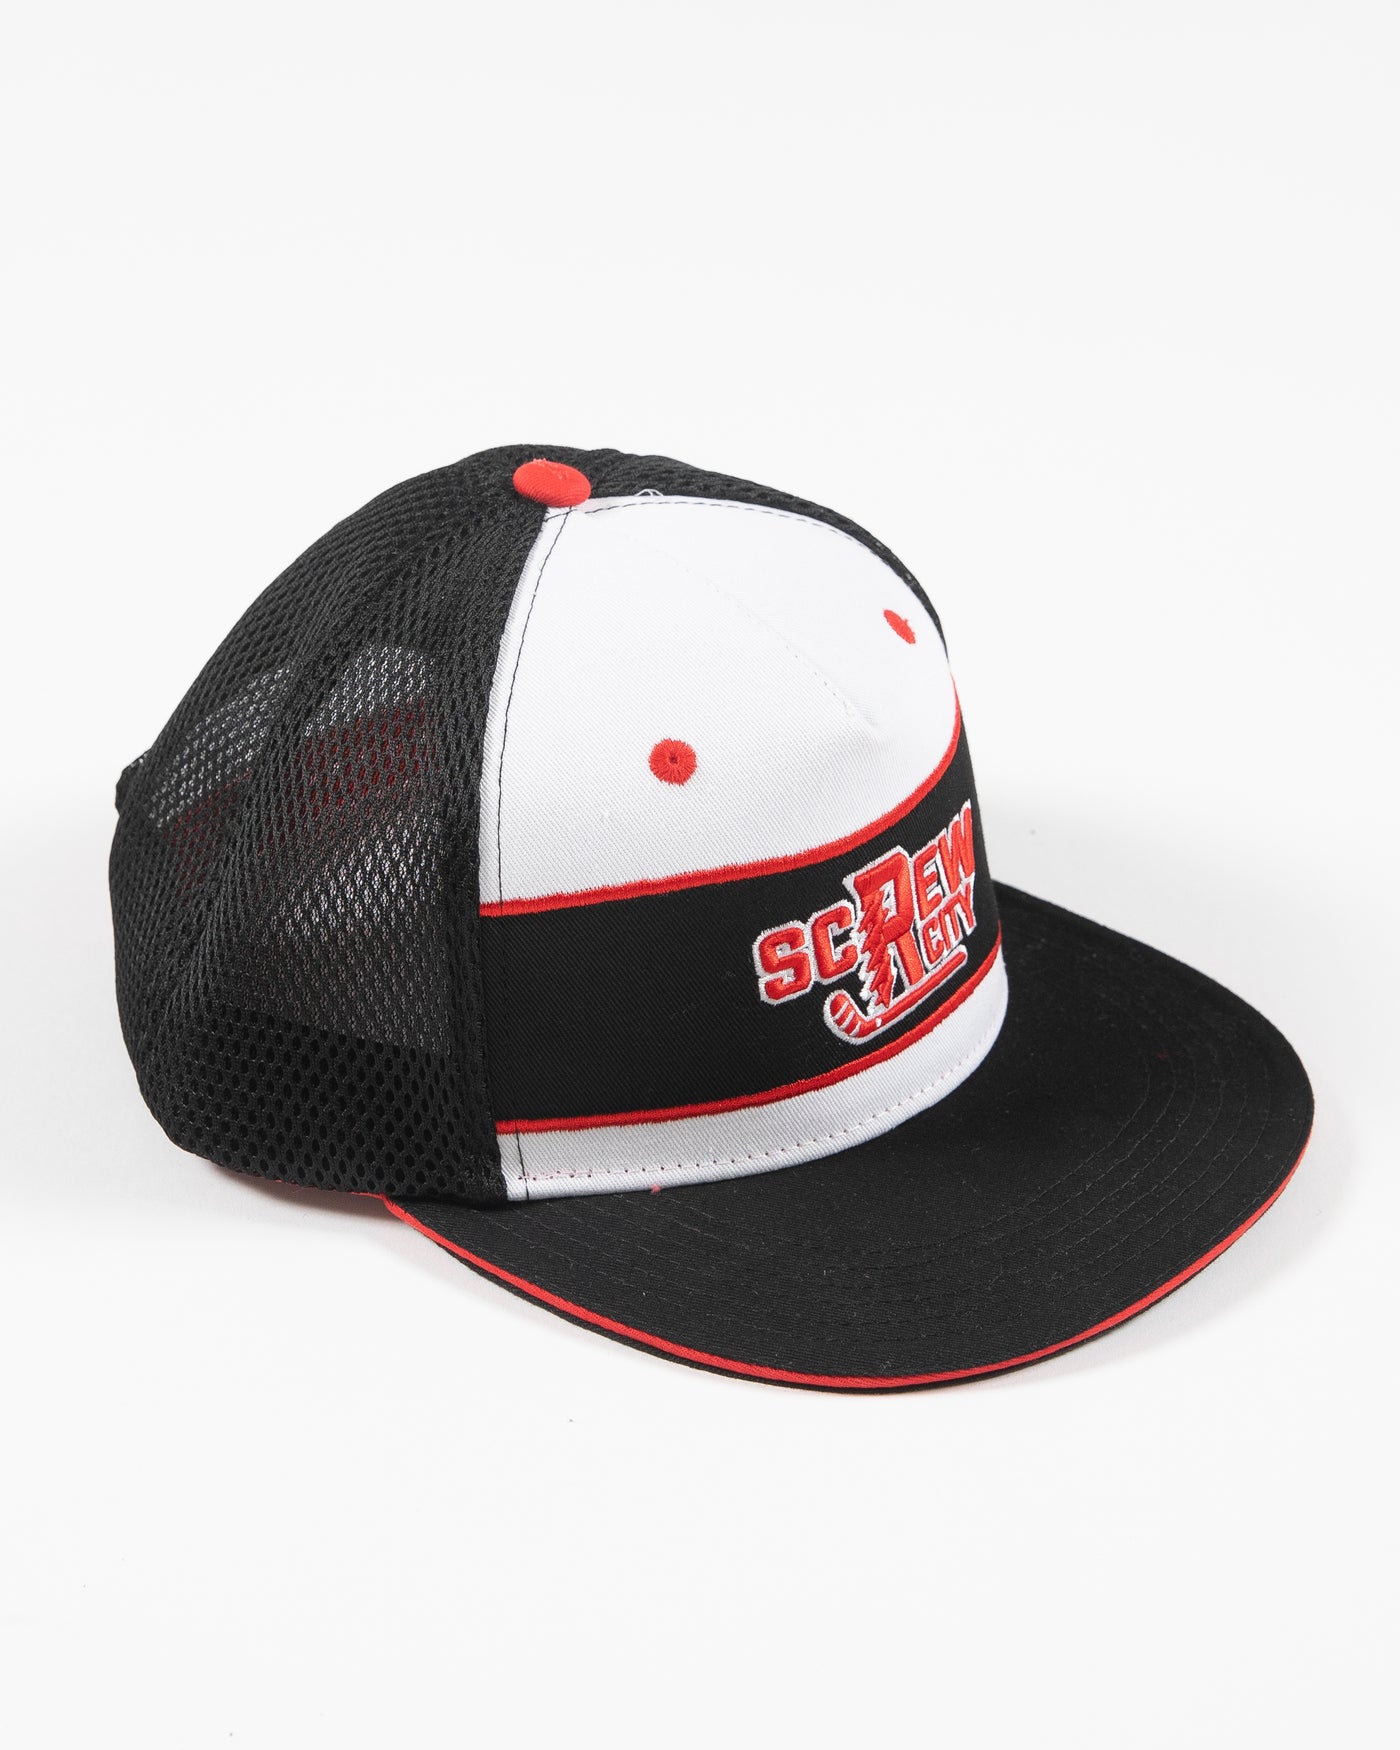 black, white and red adjustable cap with Screw City embroidered decal on front - right angle lay flat